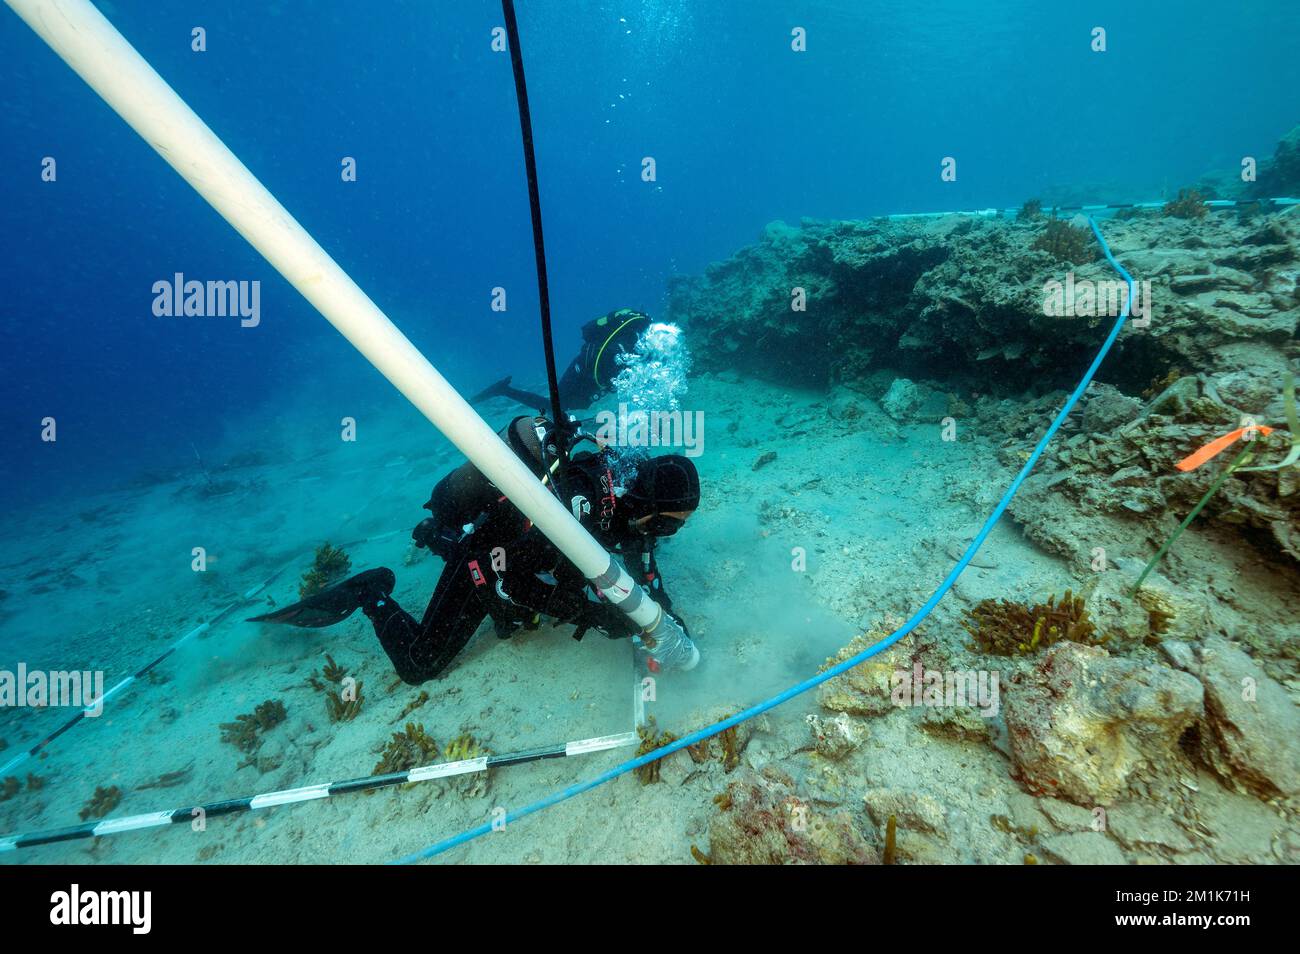 An underwater archaeologist airlifting on the ancient bronze age harbor discovered in Bozburun Marmaris Turkey. Stock Photo